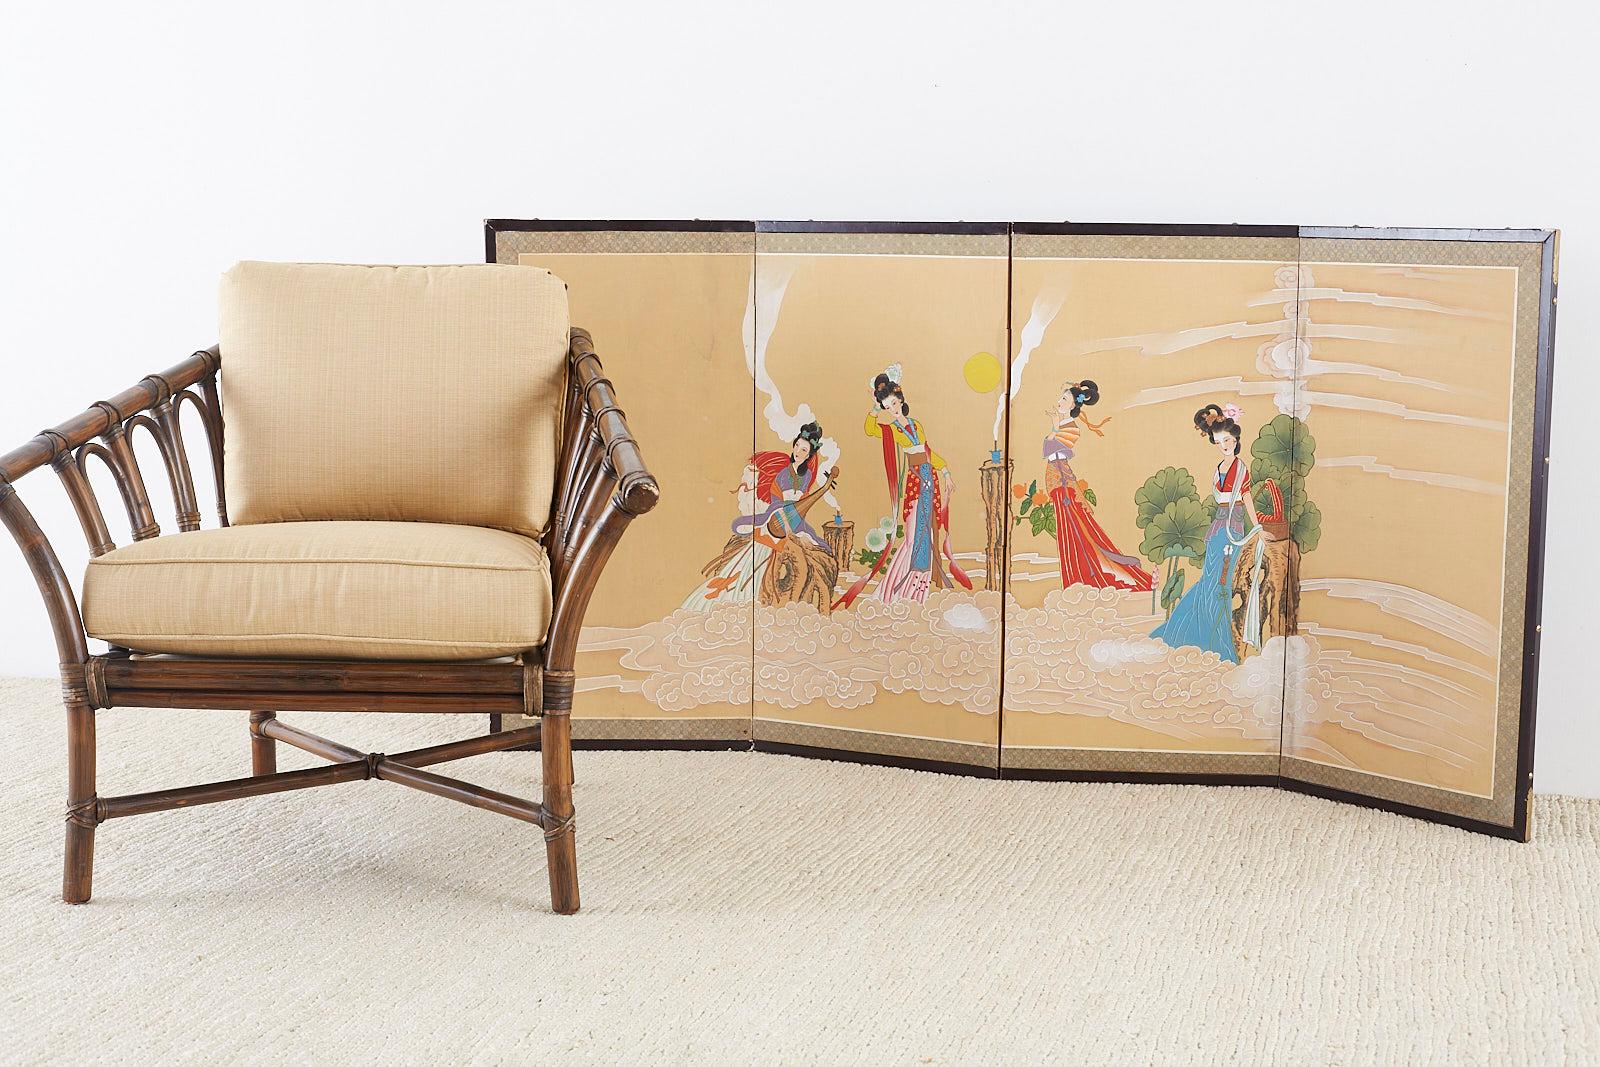 Whimsical Chinese four-panel byobu style screens depicting four celestial beauties in clouds. Colorful medium sized screen, ink and color painted on gold silk ground, 20th century titled and signed left side. Set in a wooden frame with a silk